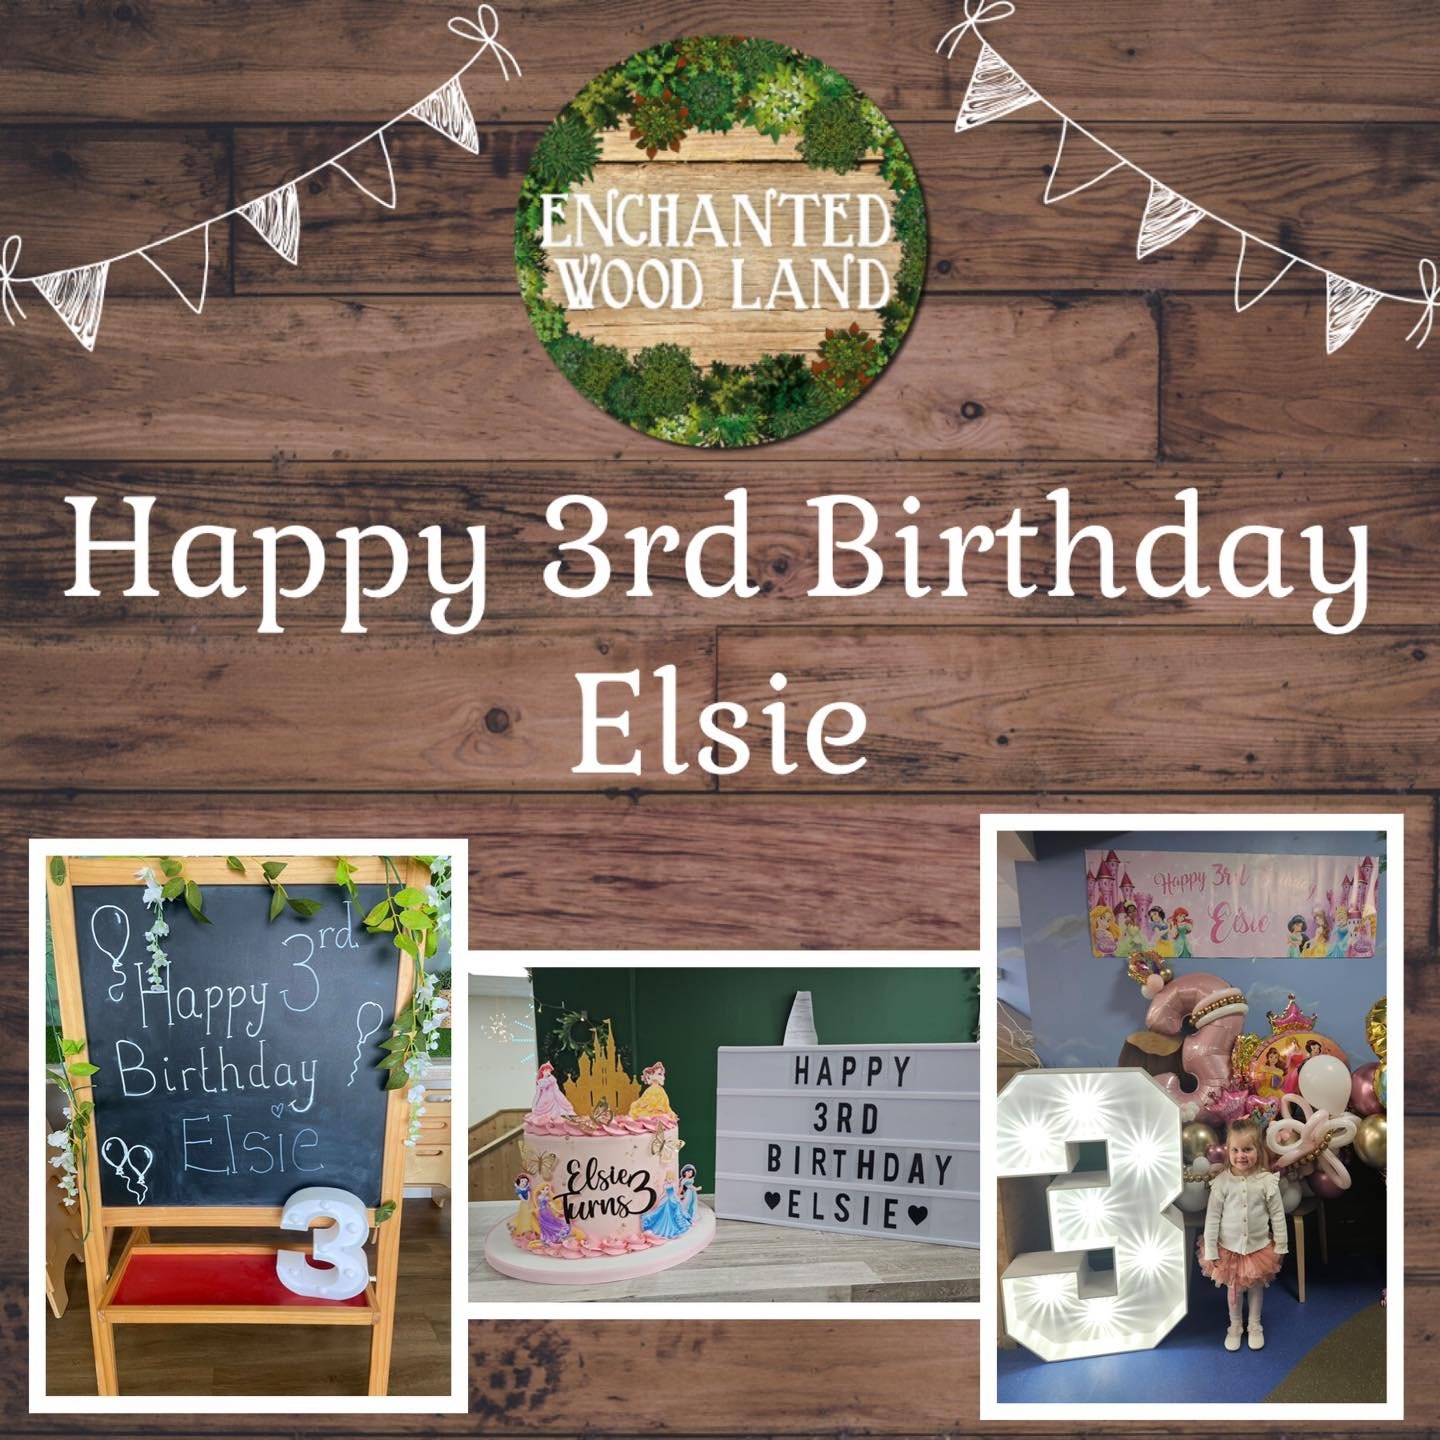 🌳💕Today we celebrated two amazing birthday parties @EnchantedWoodLand! We would like to say a big&hellip; 

💫 &lsquo;Happy 3rd Birthday Elsie&rsquo;

💫 &lsquo;Happy 3rd Birthday Kyra&rsquo;

We hope you all had an amazing party celebrating with a